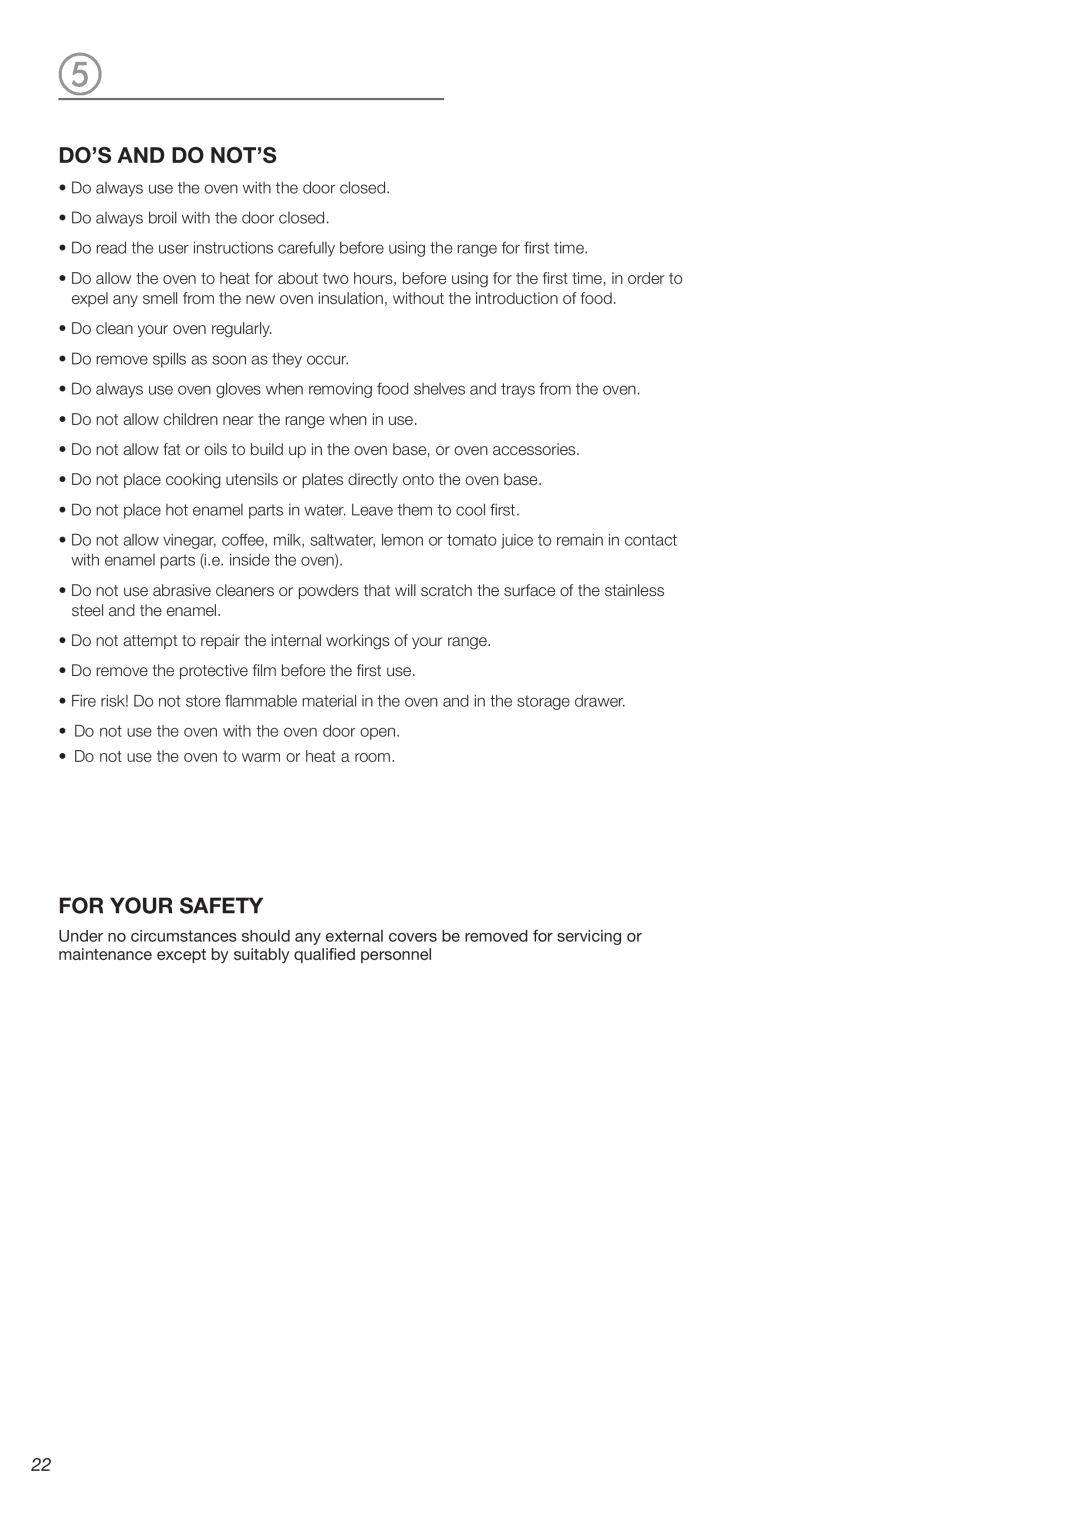 Verona VEFSGG 244 warranty Do’S And Do Not’S, For Your Safety 